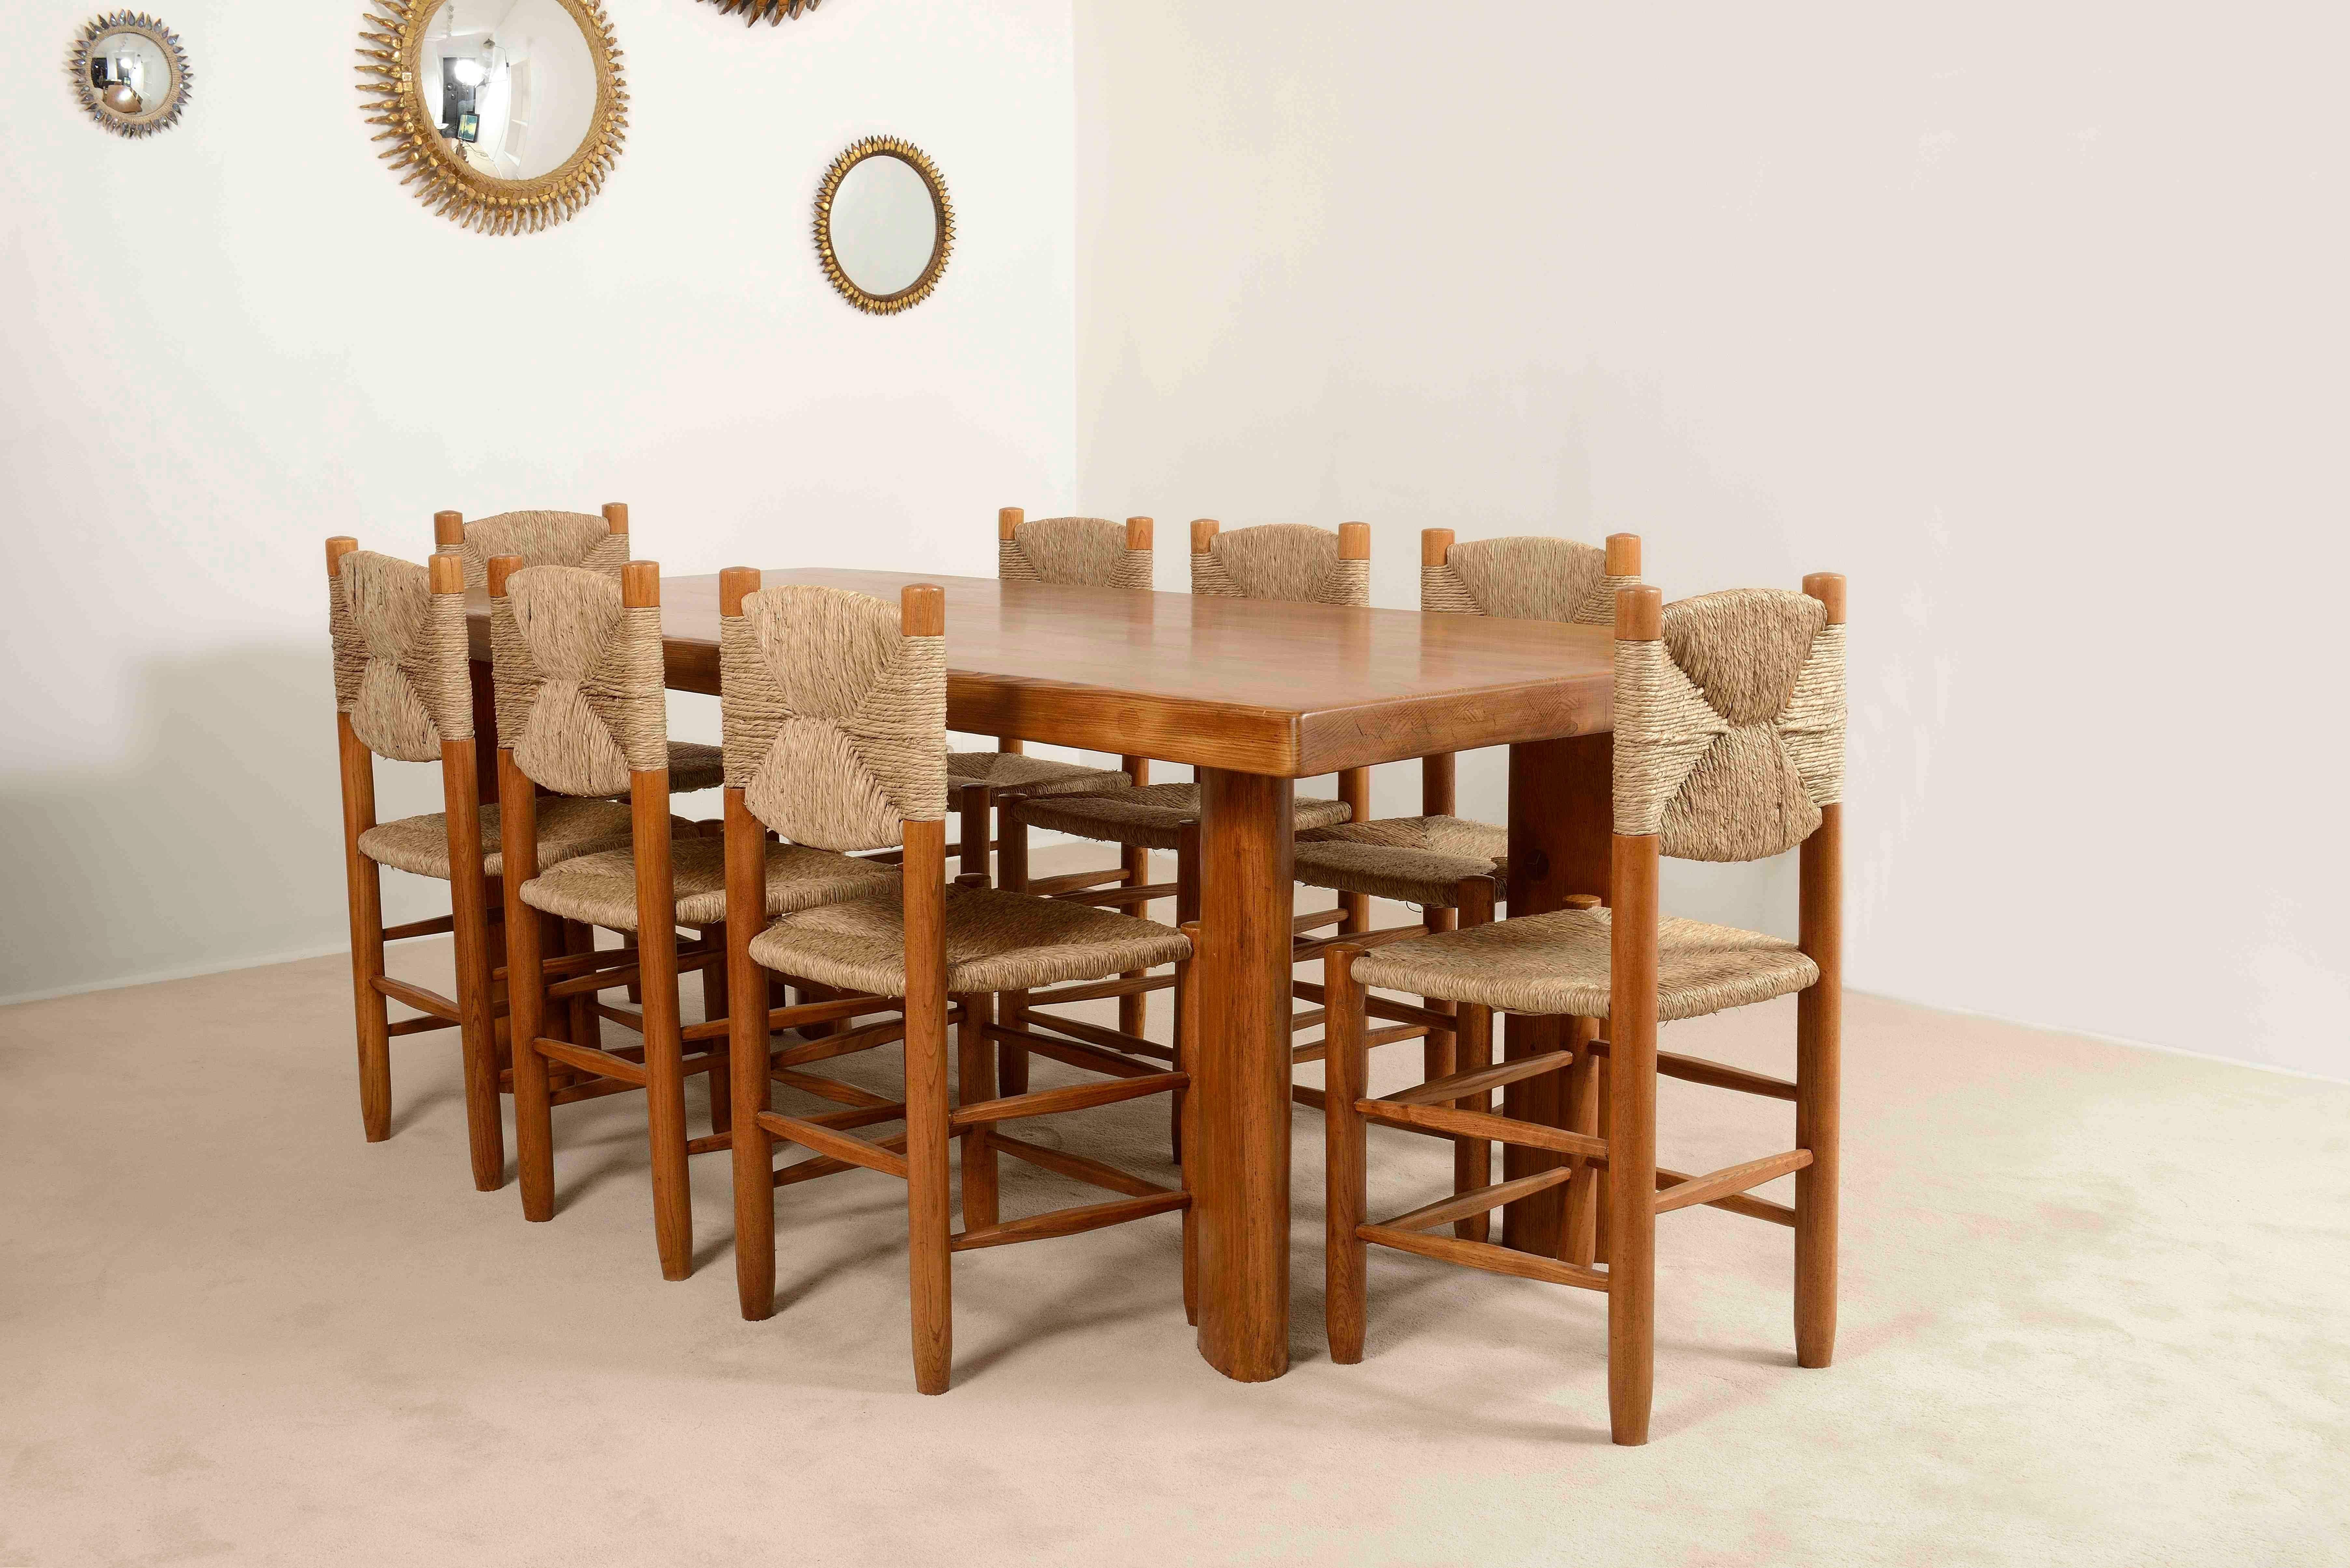 Pinewood rectangulare dining table in 